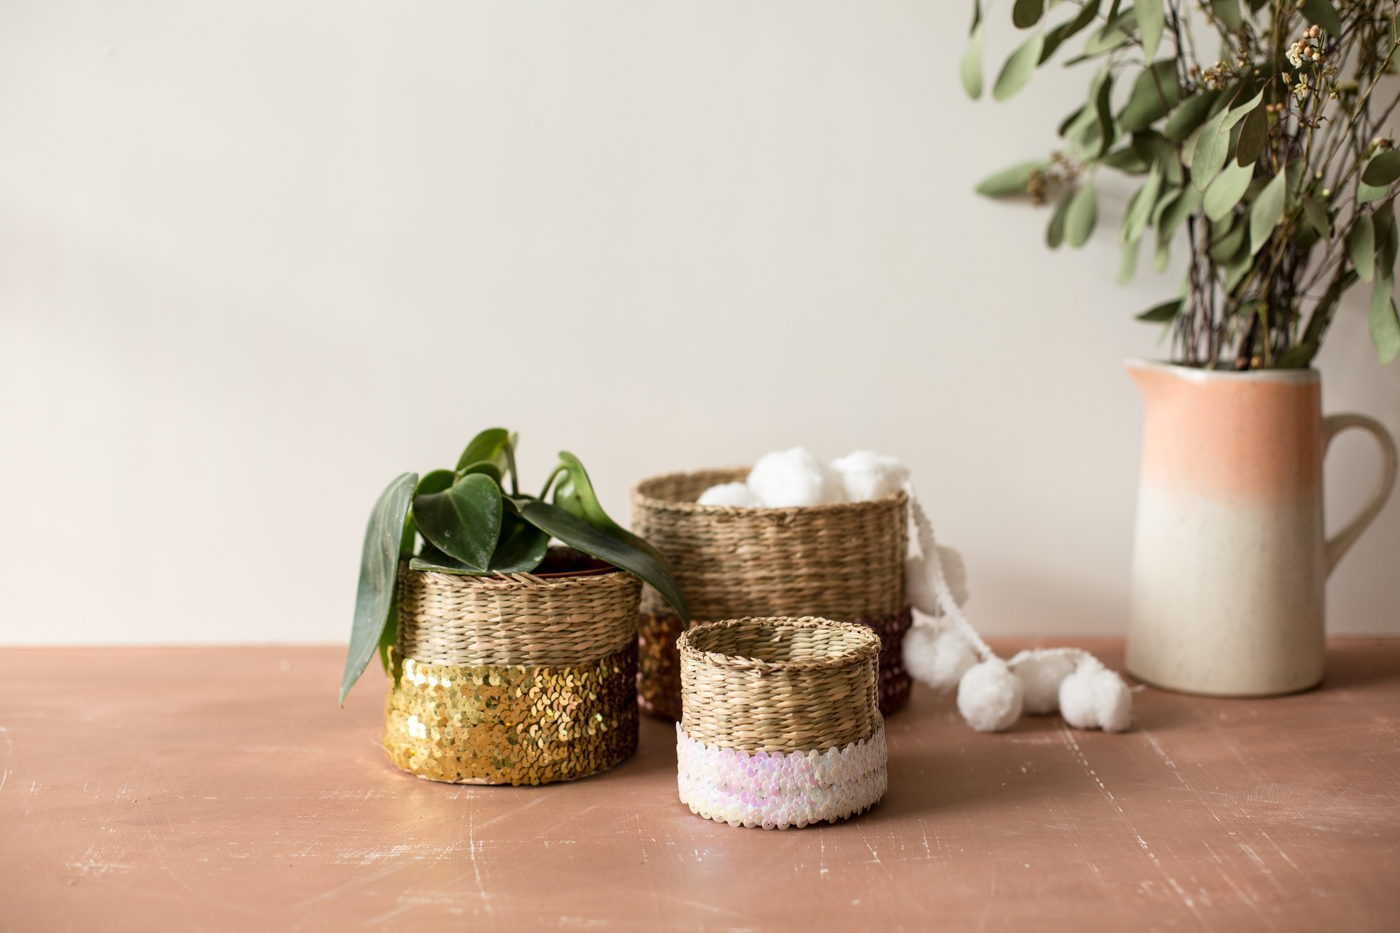 DIY Sequin Wrapped Baskets | Fall For DIY